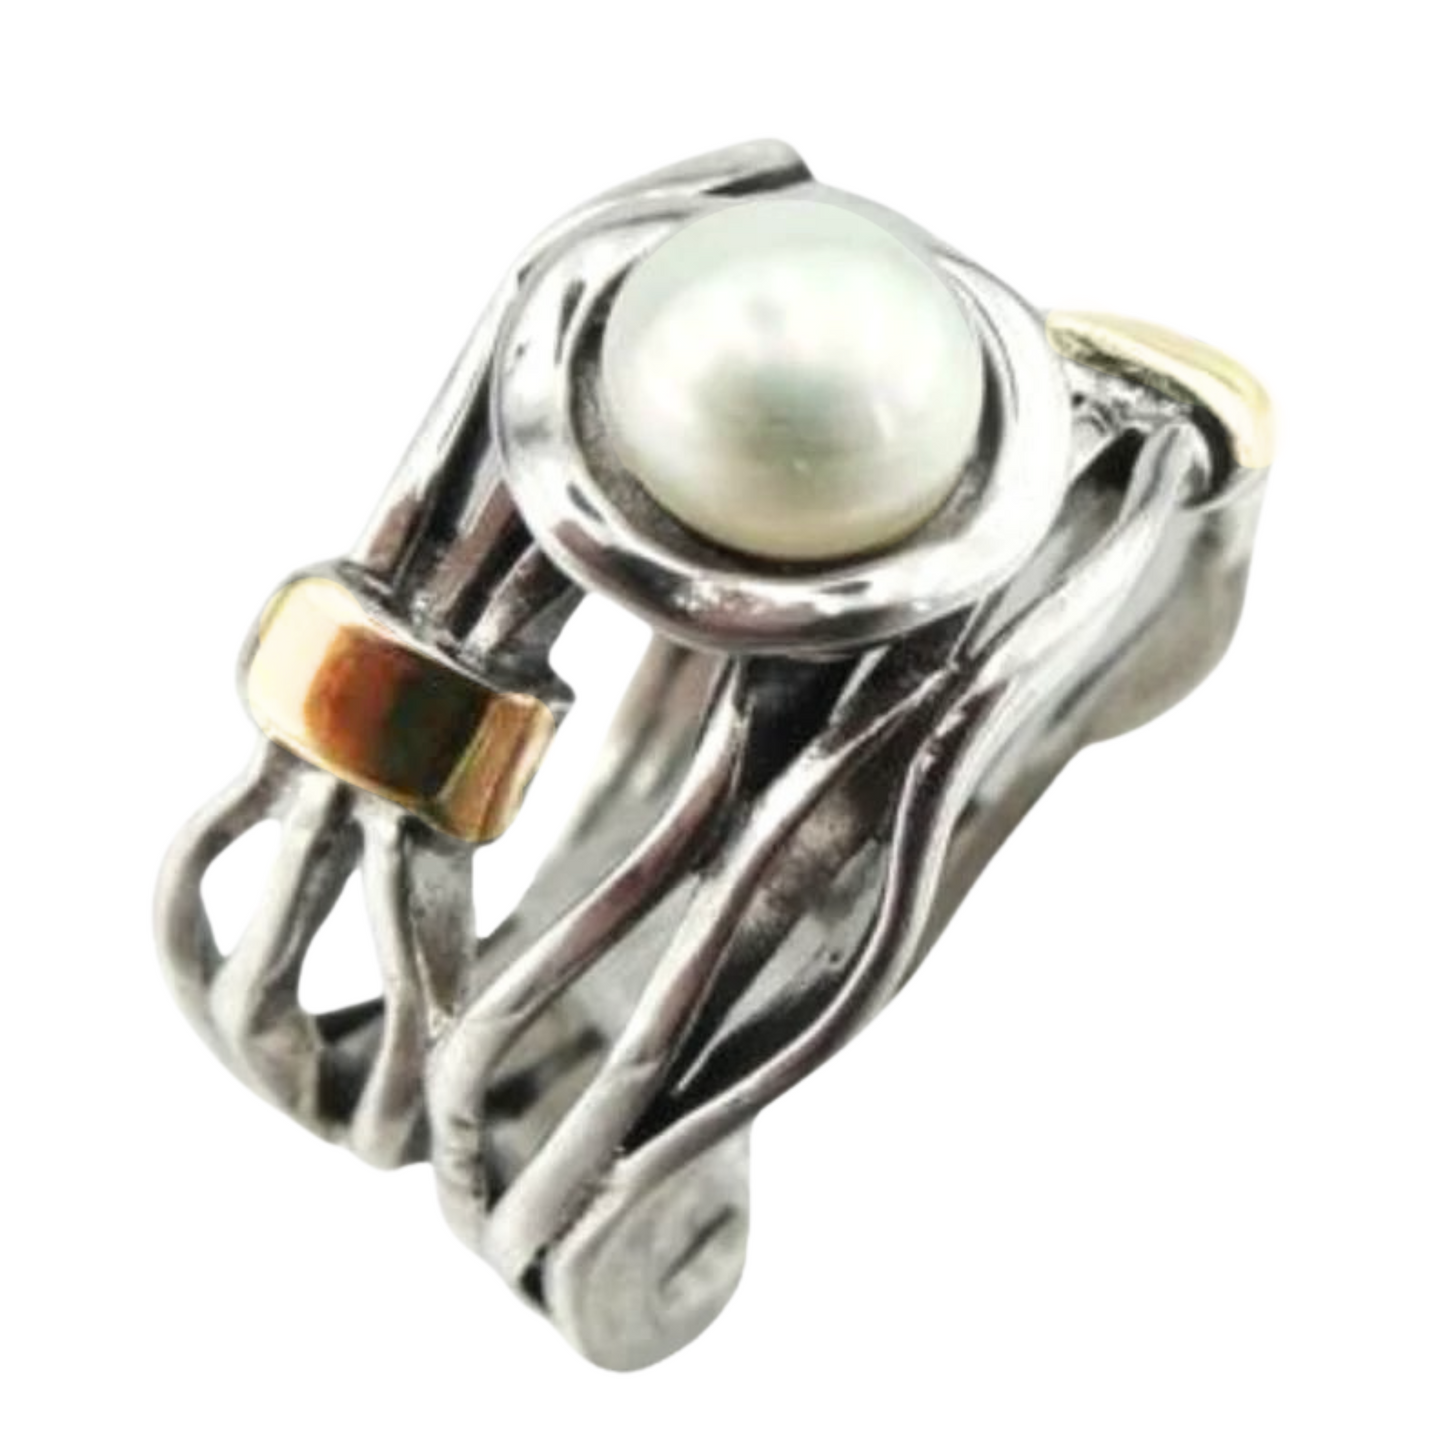 Extremely Elegant pearl ring<br>The ring is made of solid Sterling silver and 9K Yellow Gold, decorated with natural white pearl.